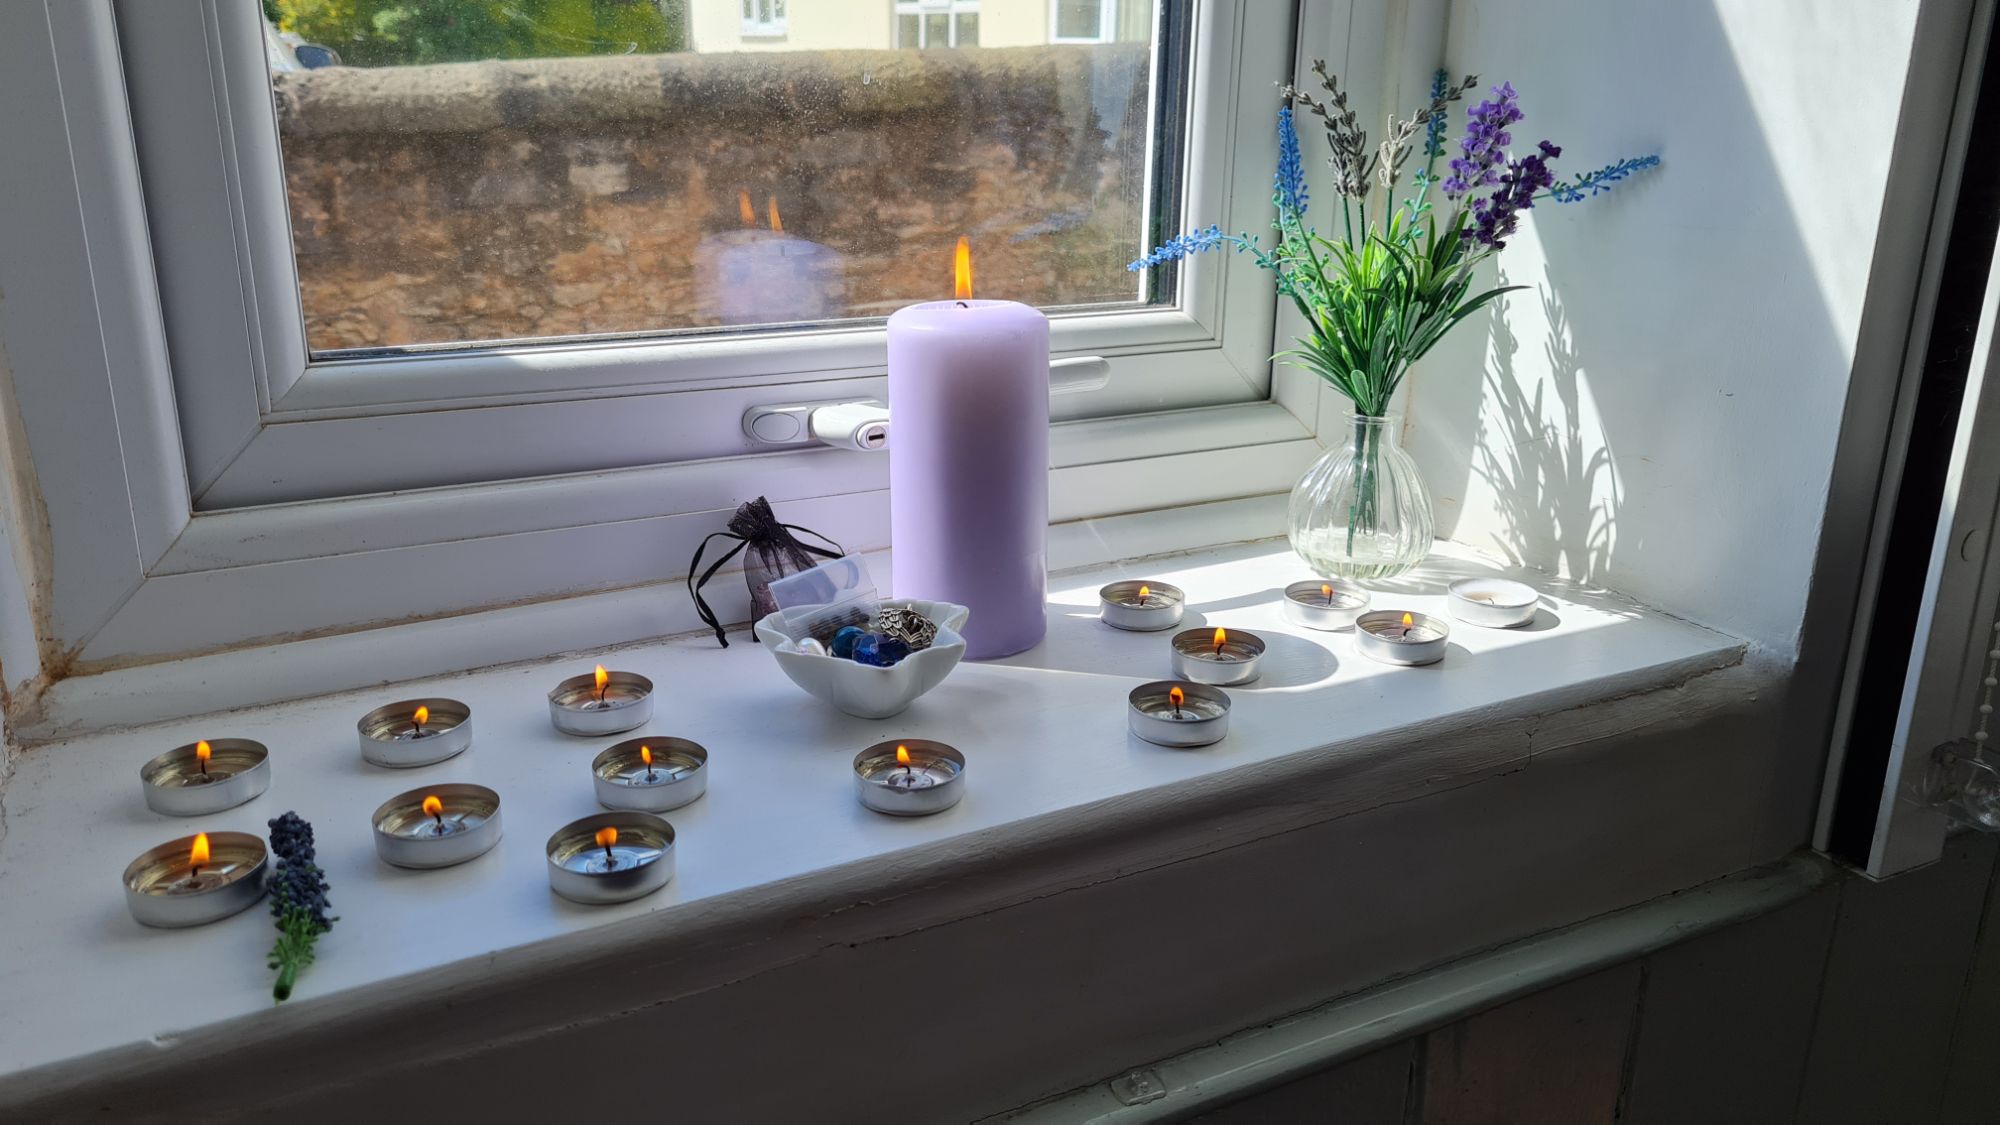 A lit lilac pillar candle on a window ledge, surrounded by lit tealights. There is a small vase of flowers in the corner of the window ledge.